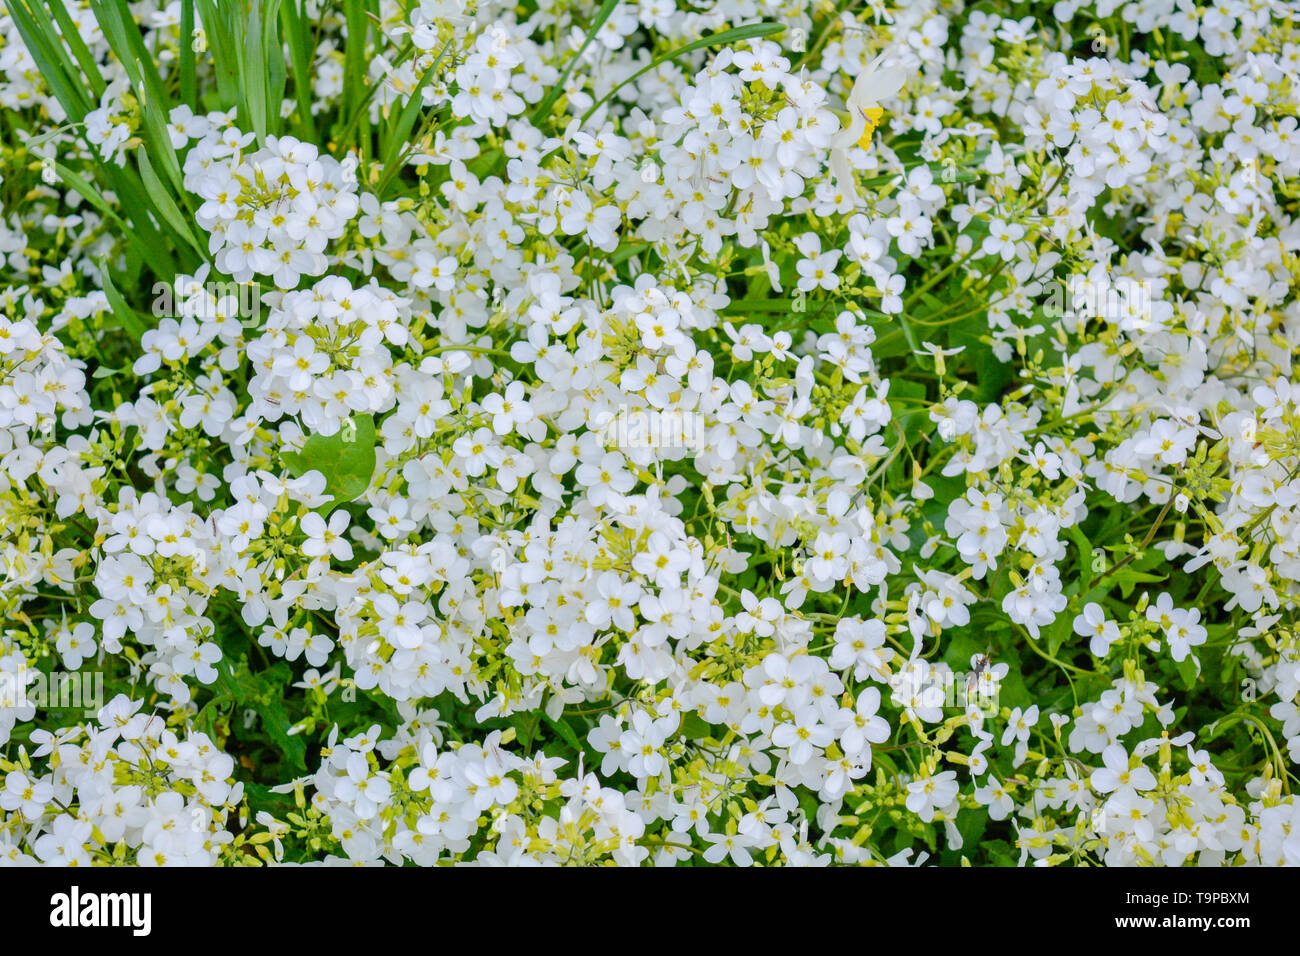 Blooming Little White Meadow Flower In The Garden Spring Flowers Close Up Stock Photo Alamy